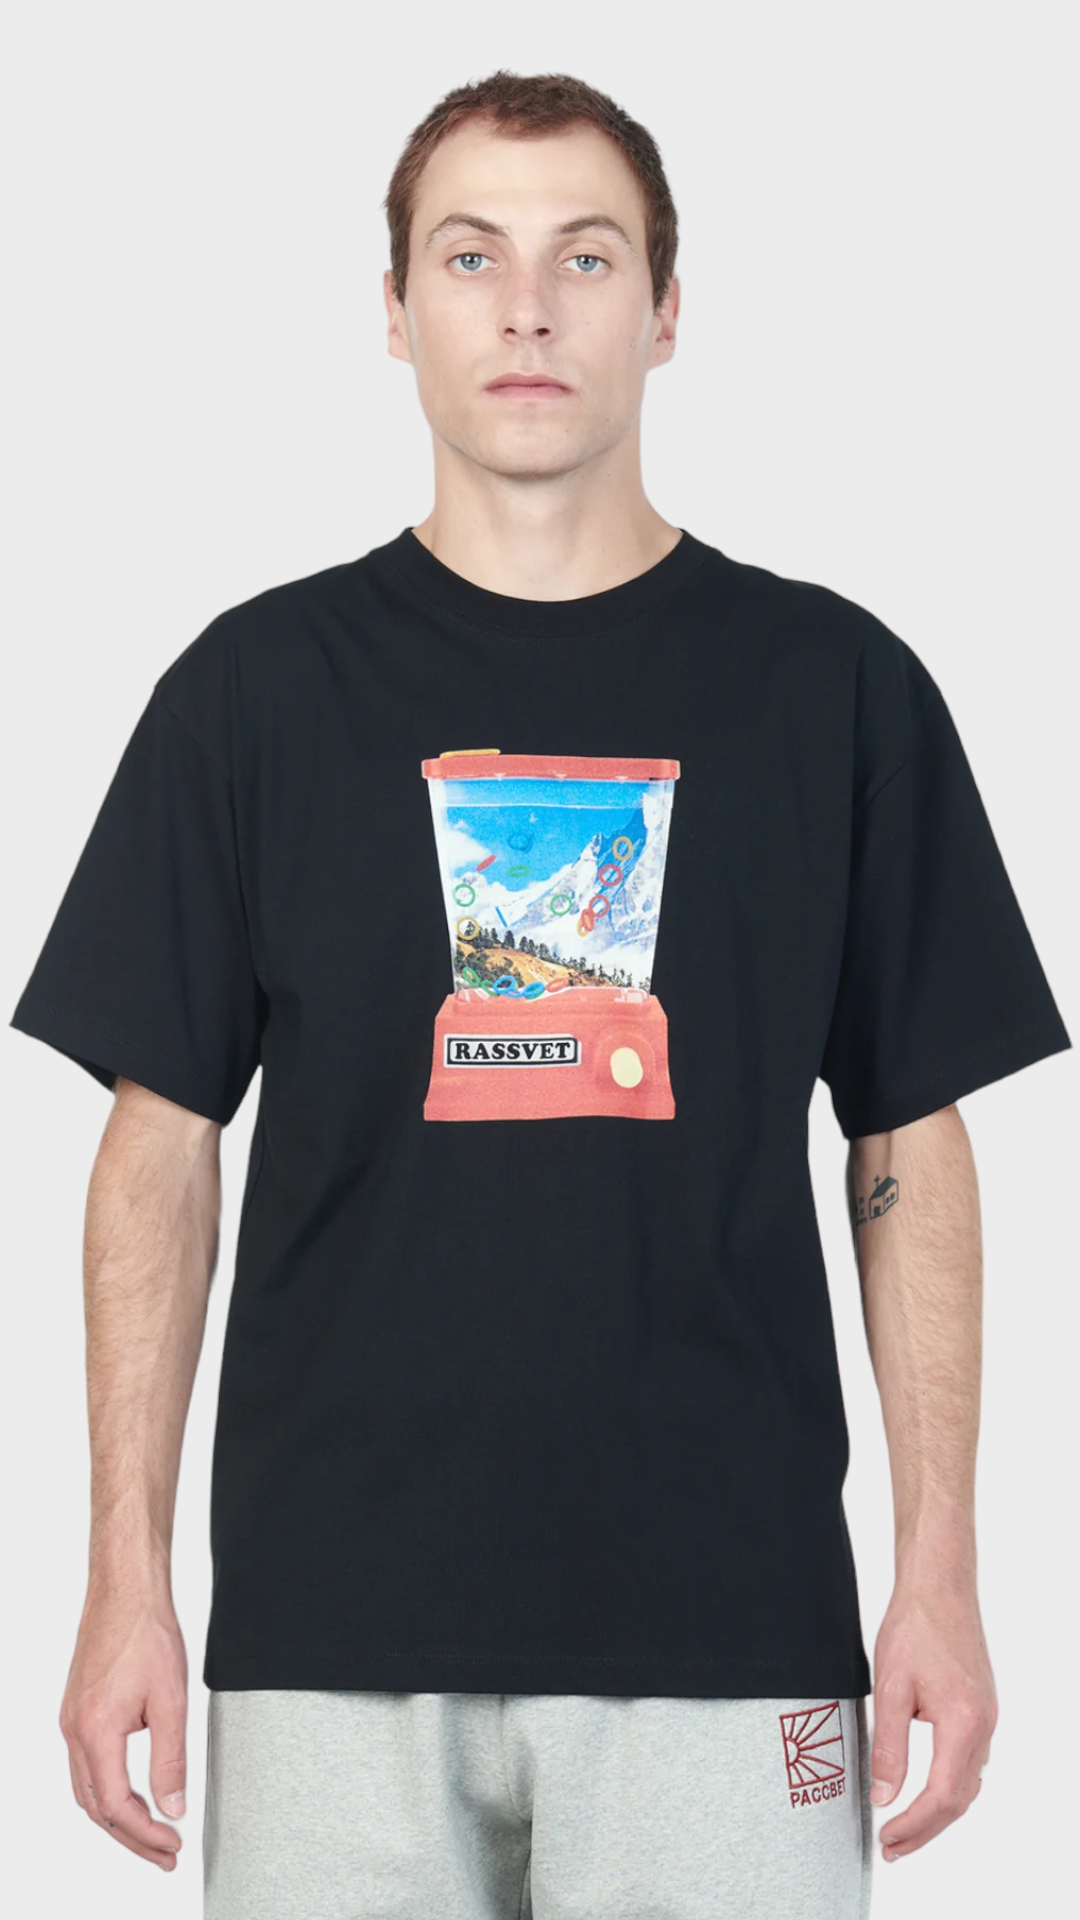 Waterful Ring Toss Tshirt